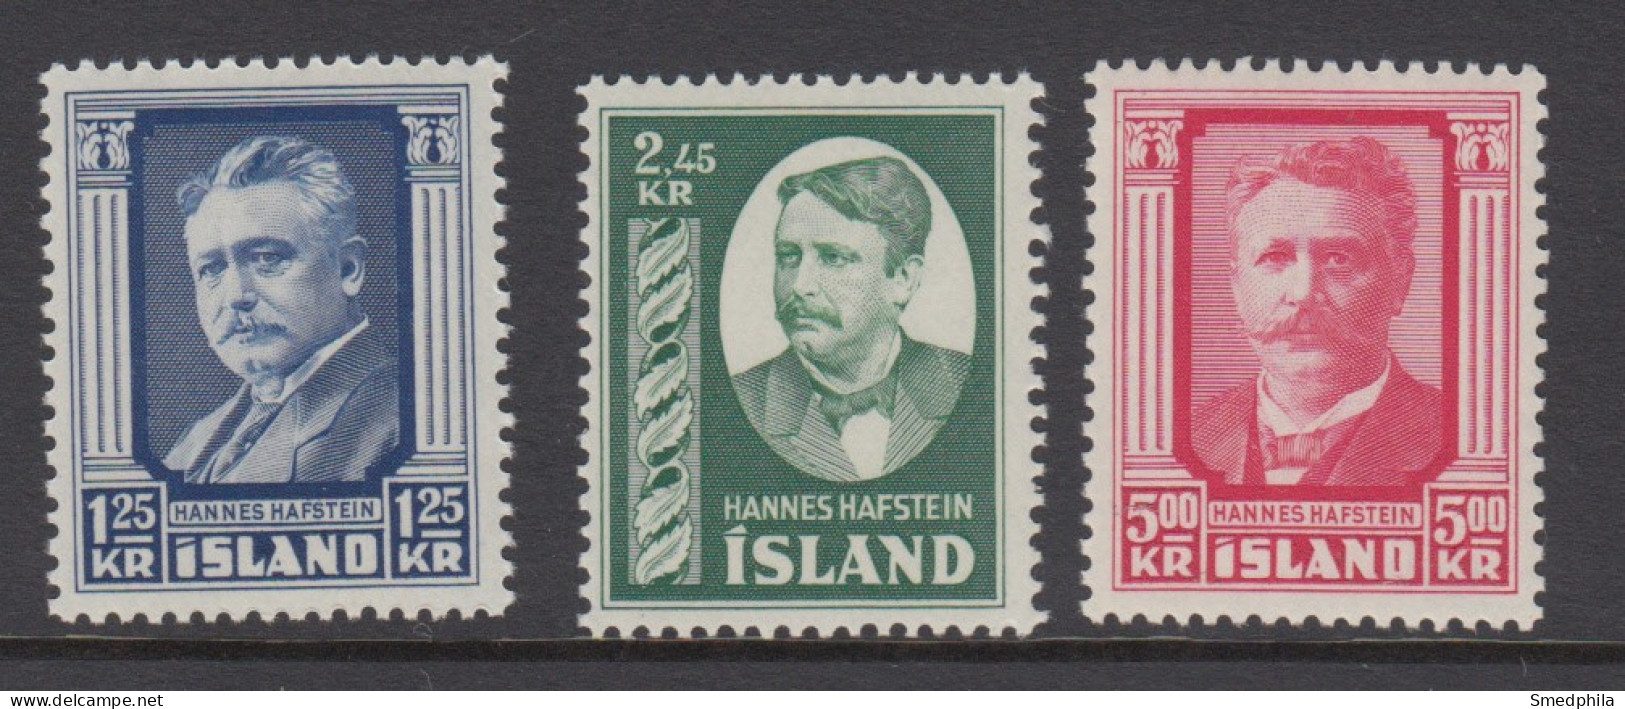 Iceland 1954 - Michel 293-295 MNH ** - Unused Stamps